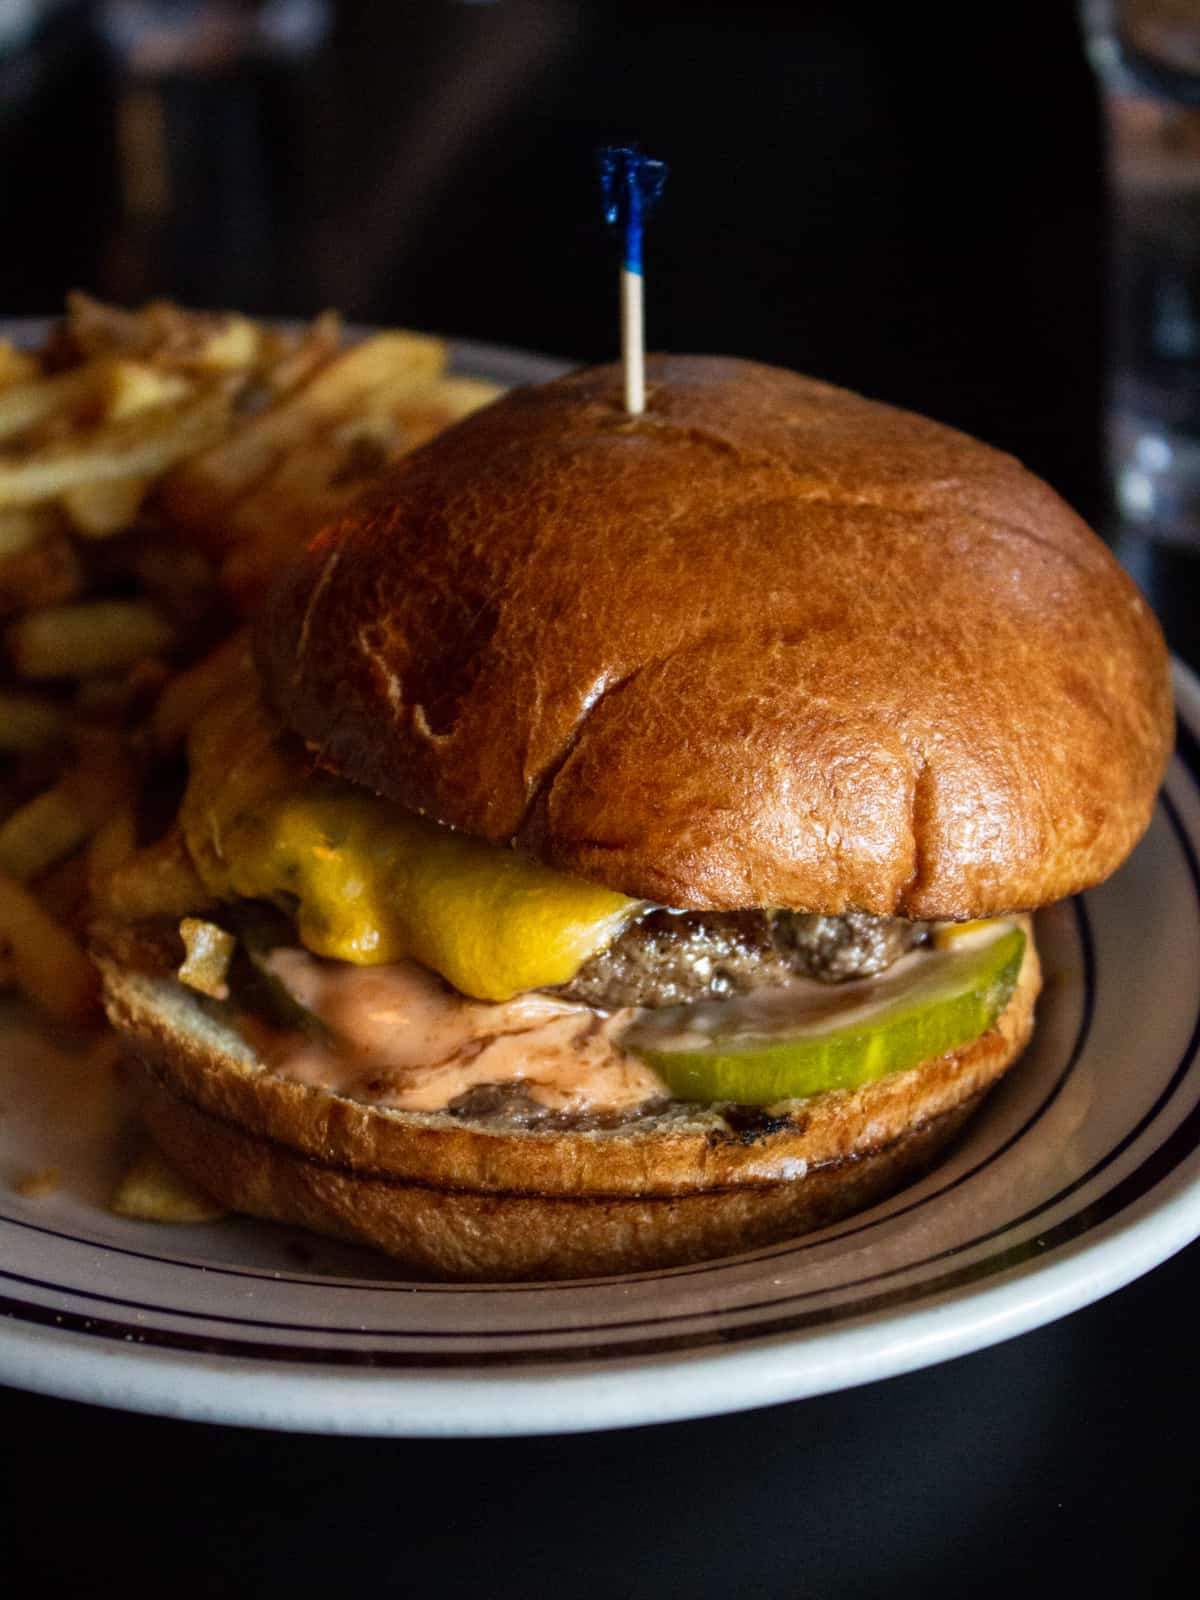 Read our list of the 20 best burgers in Milwaukee for local burger recommendations from classic to artisanal to wildly inventive burgers!